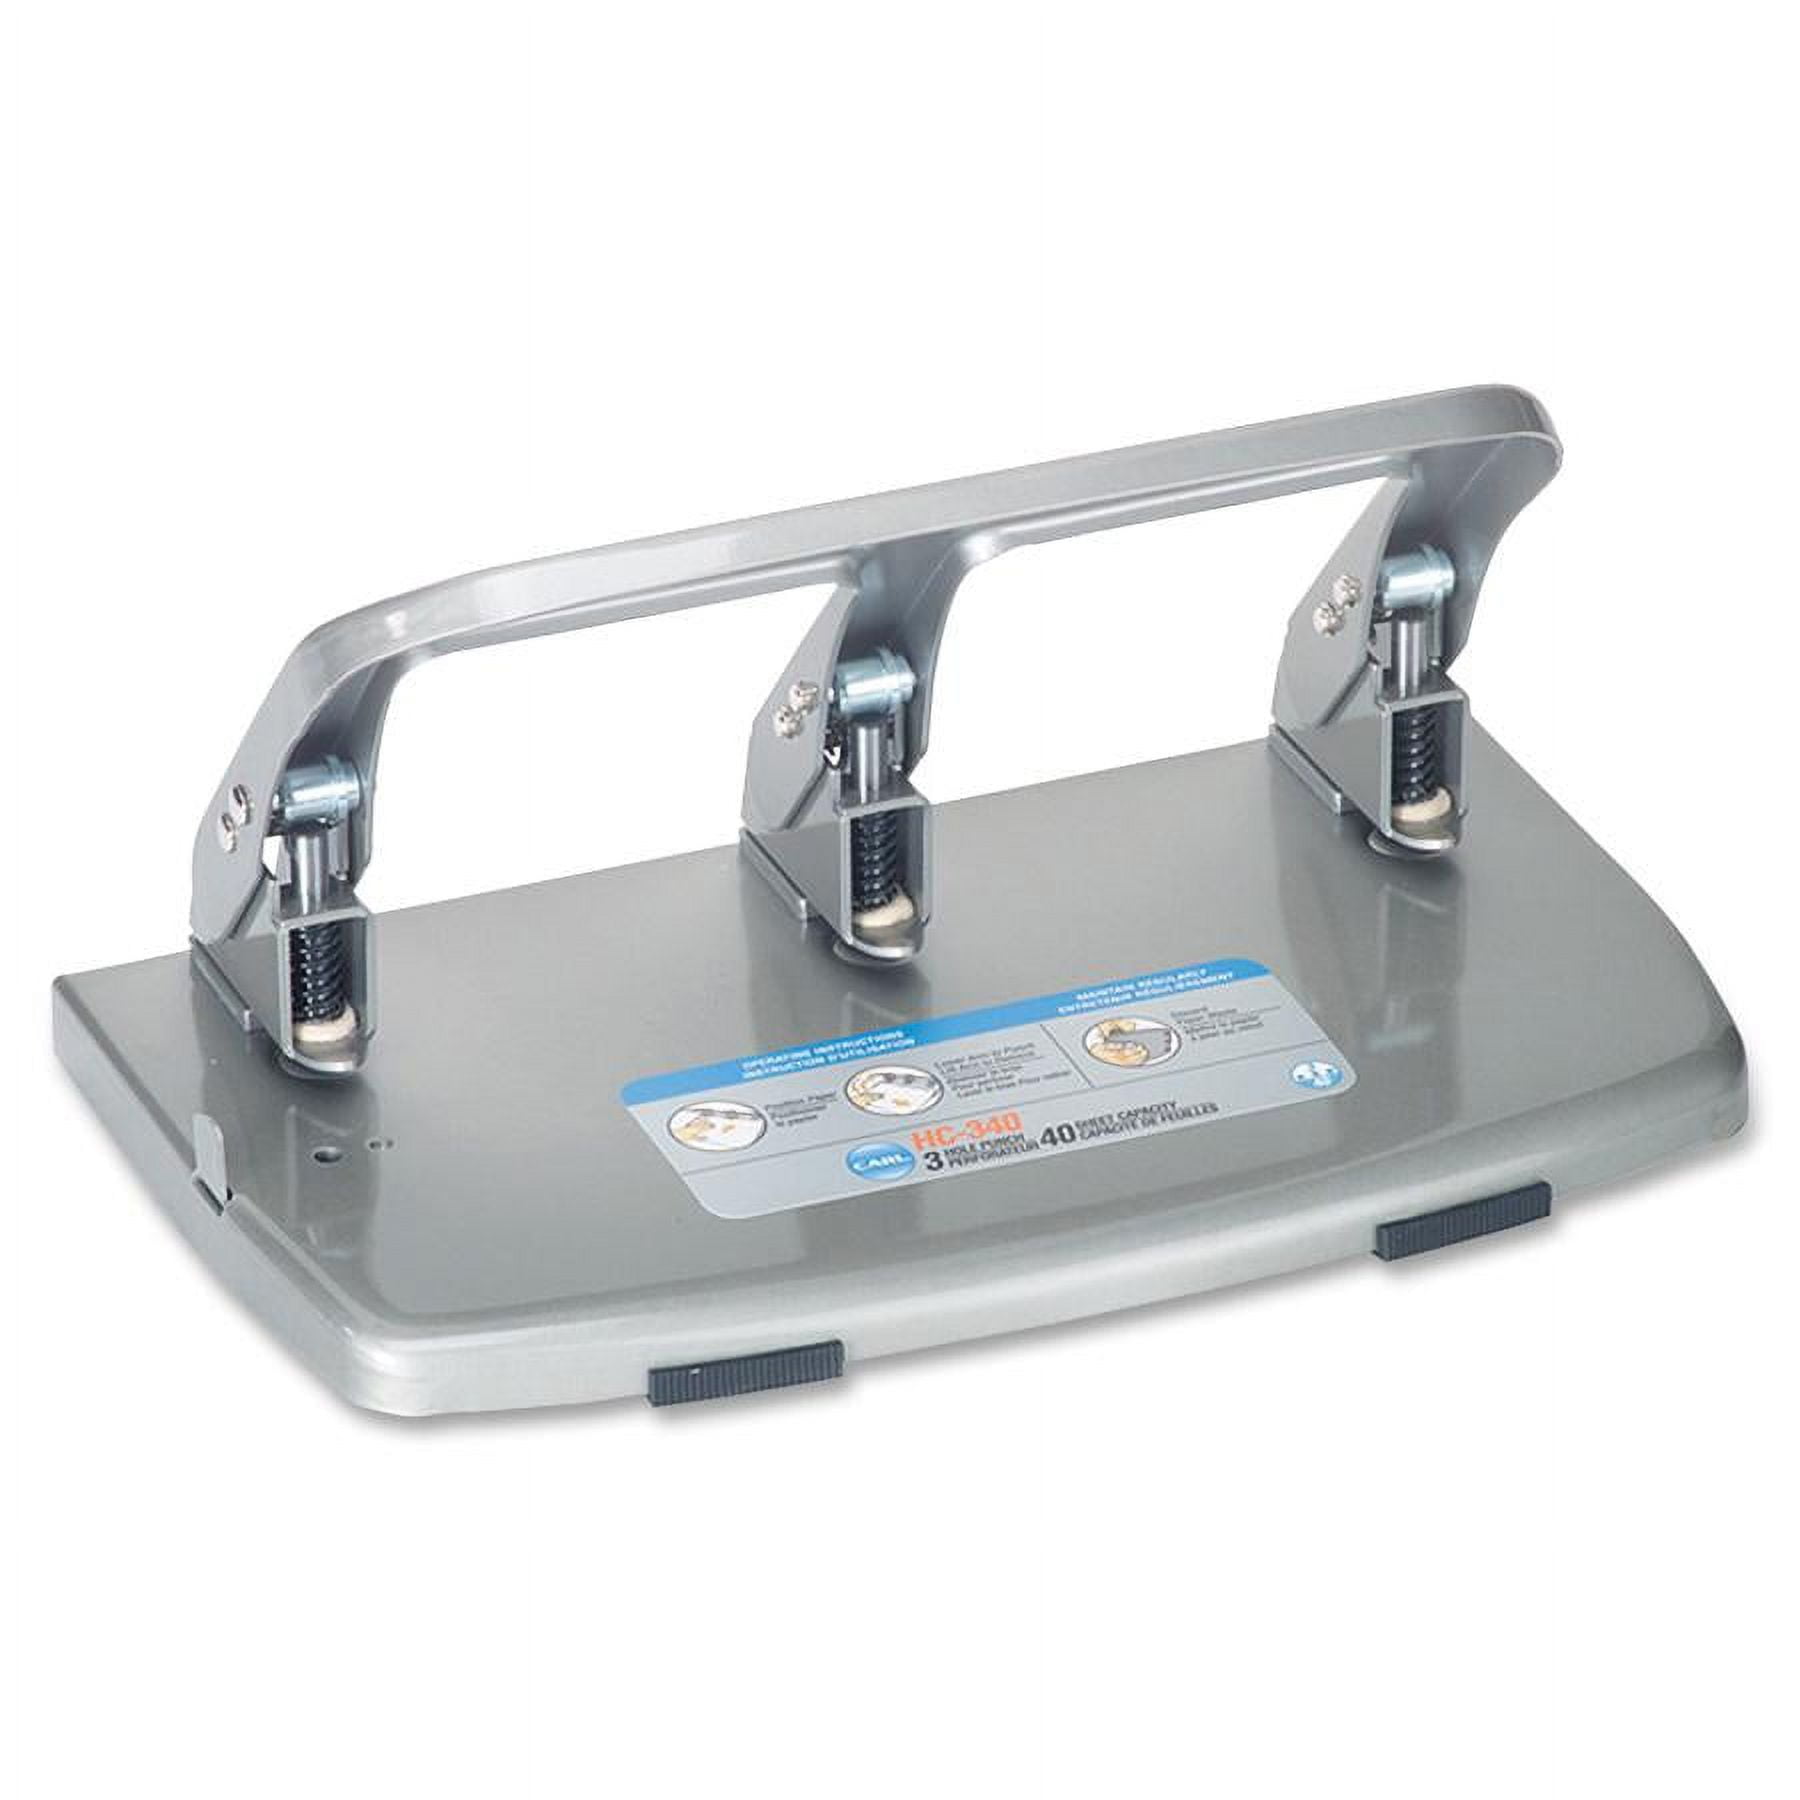 Officemate 1- Hole Punch 5 Sheet Capacity Silver (90091)